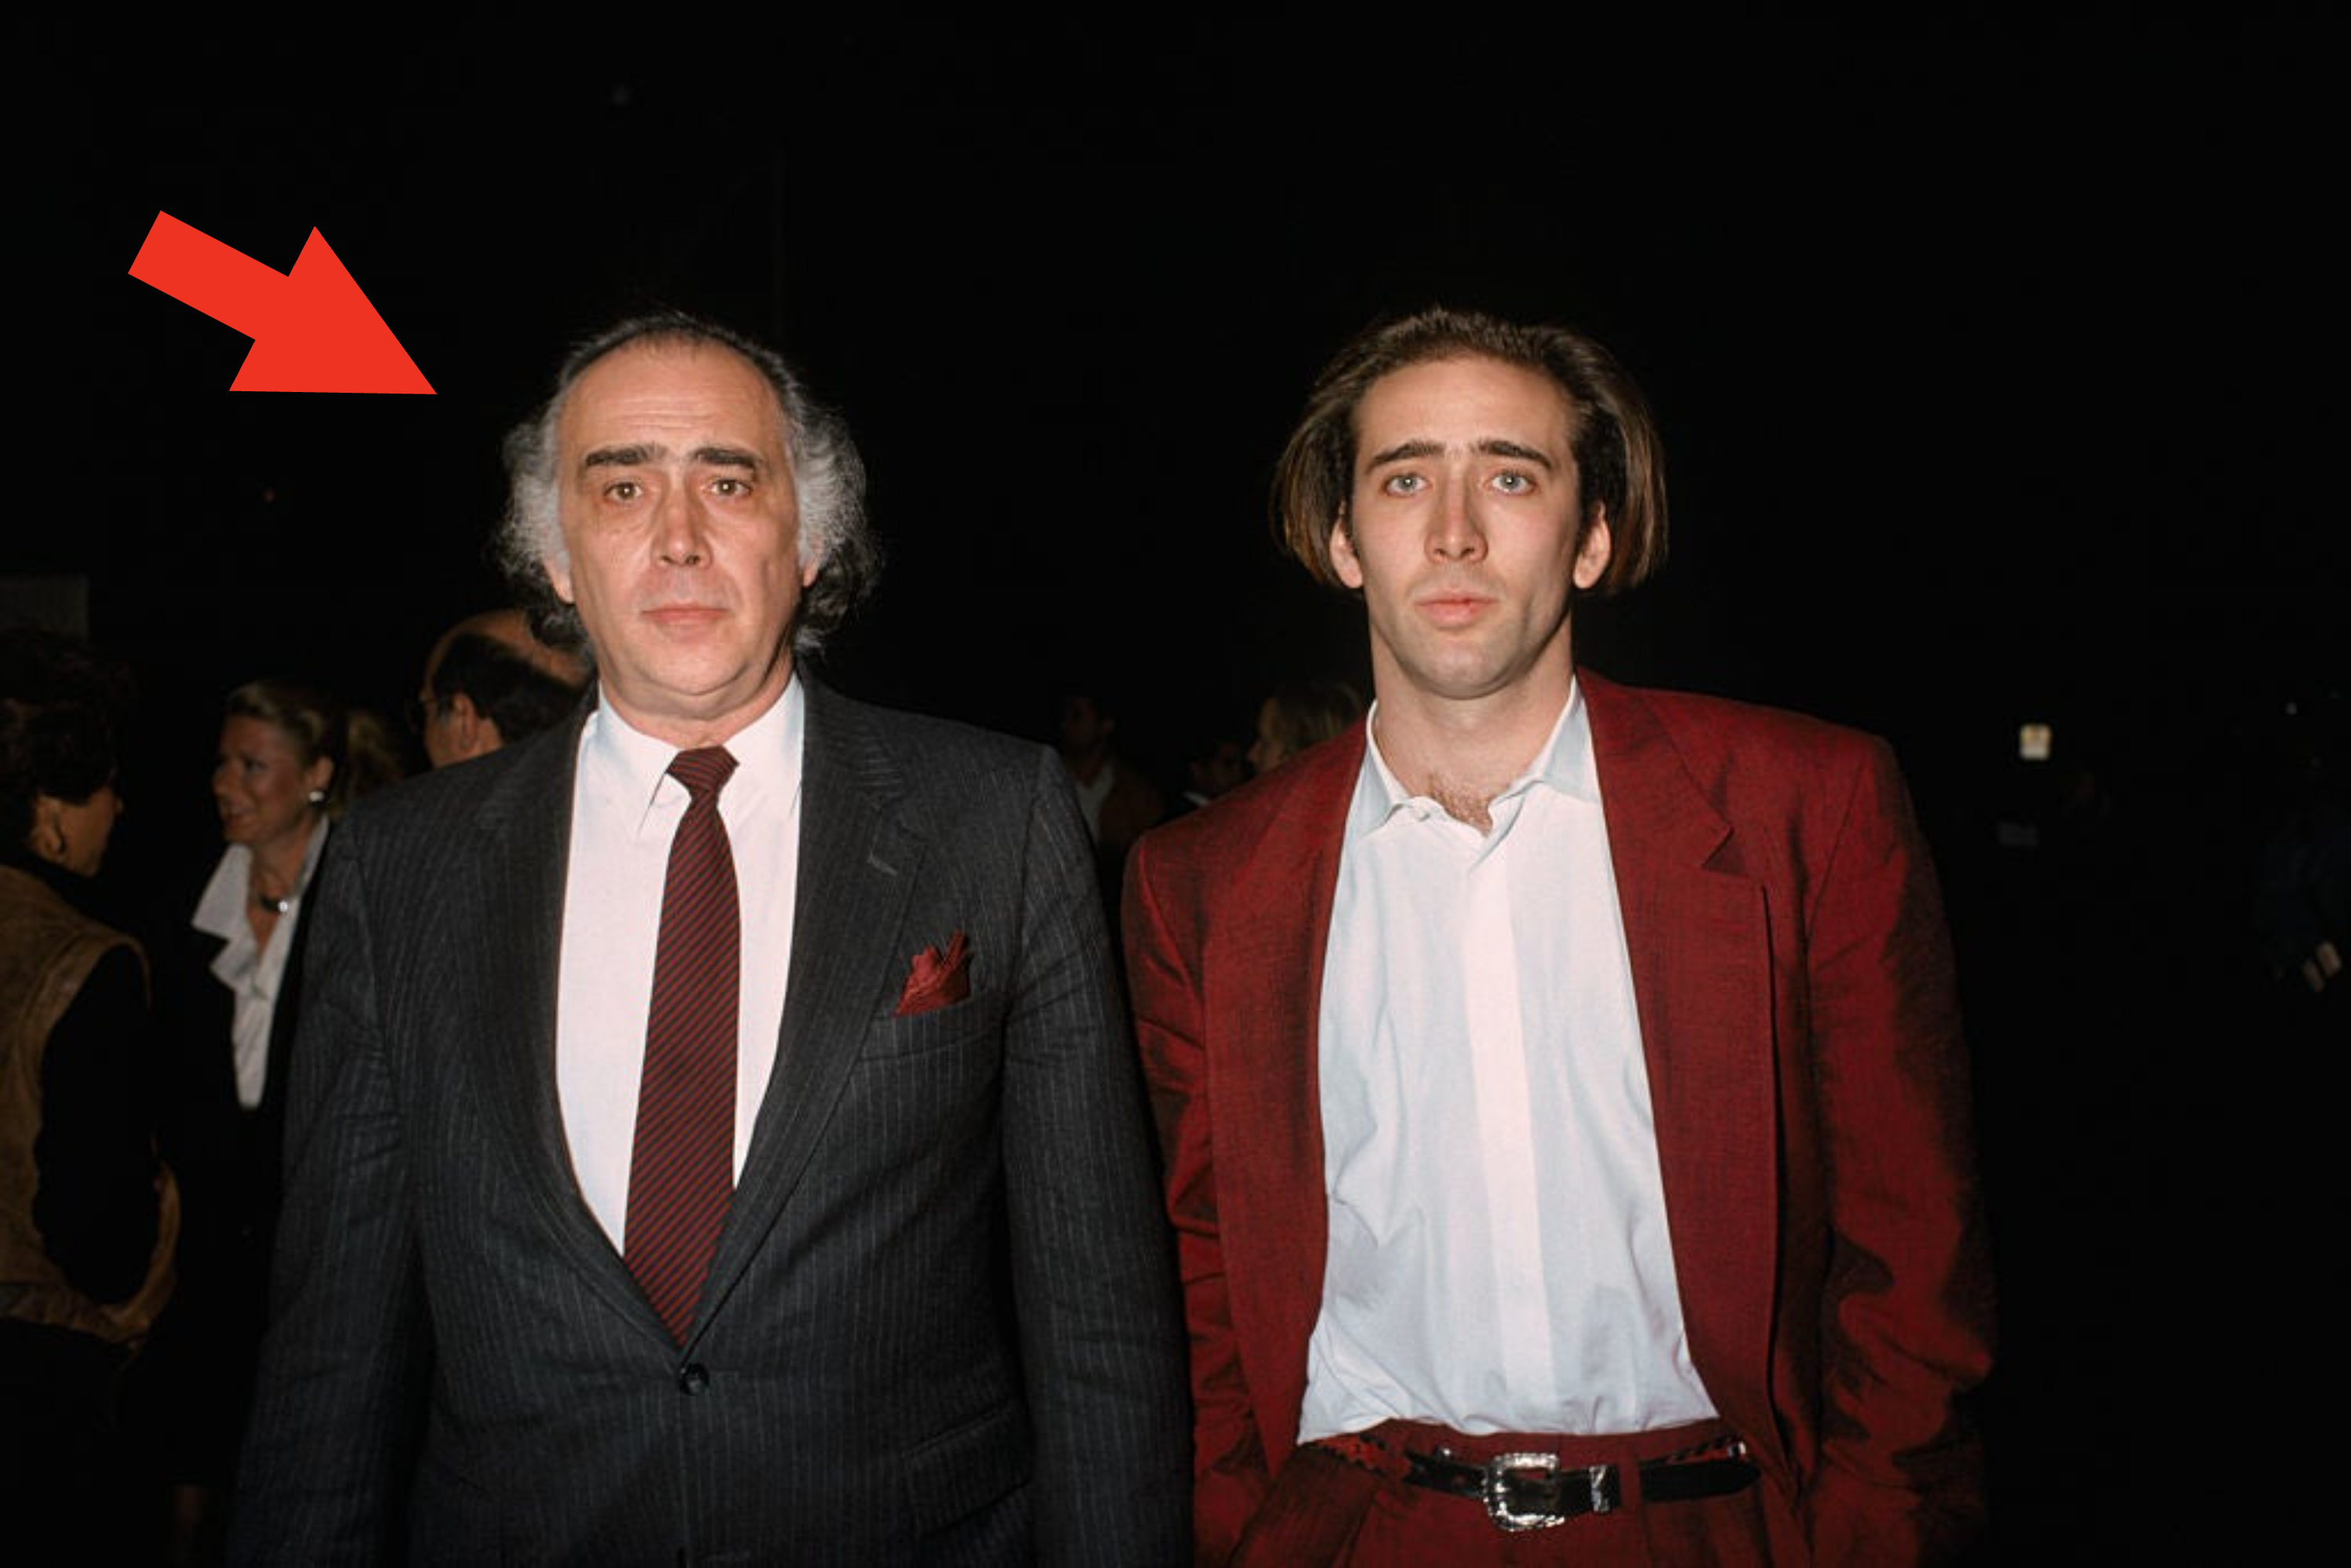 Two men at an event, one in a gray suit with a tie and the other in a red blazer over a white shirt